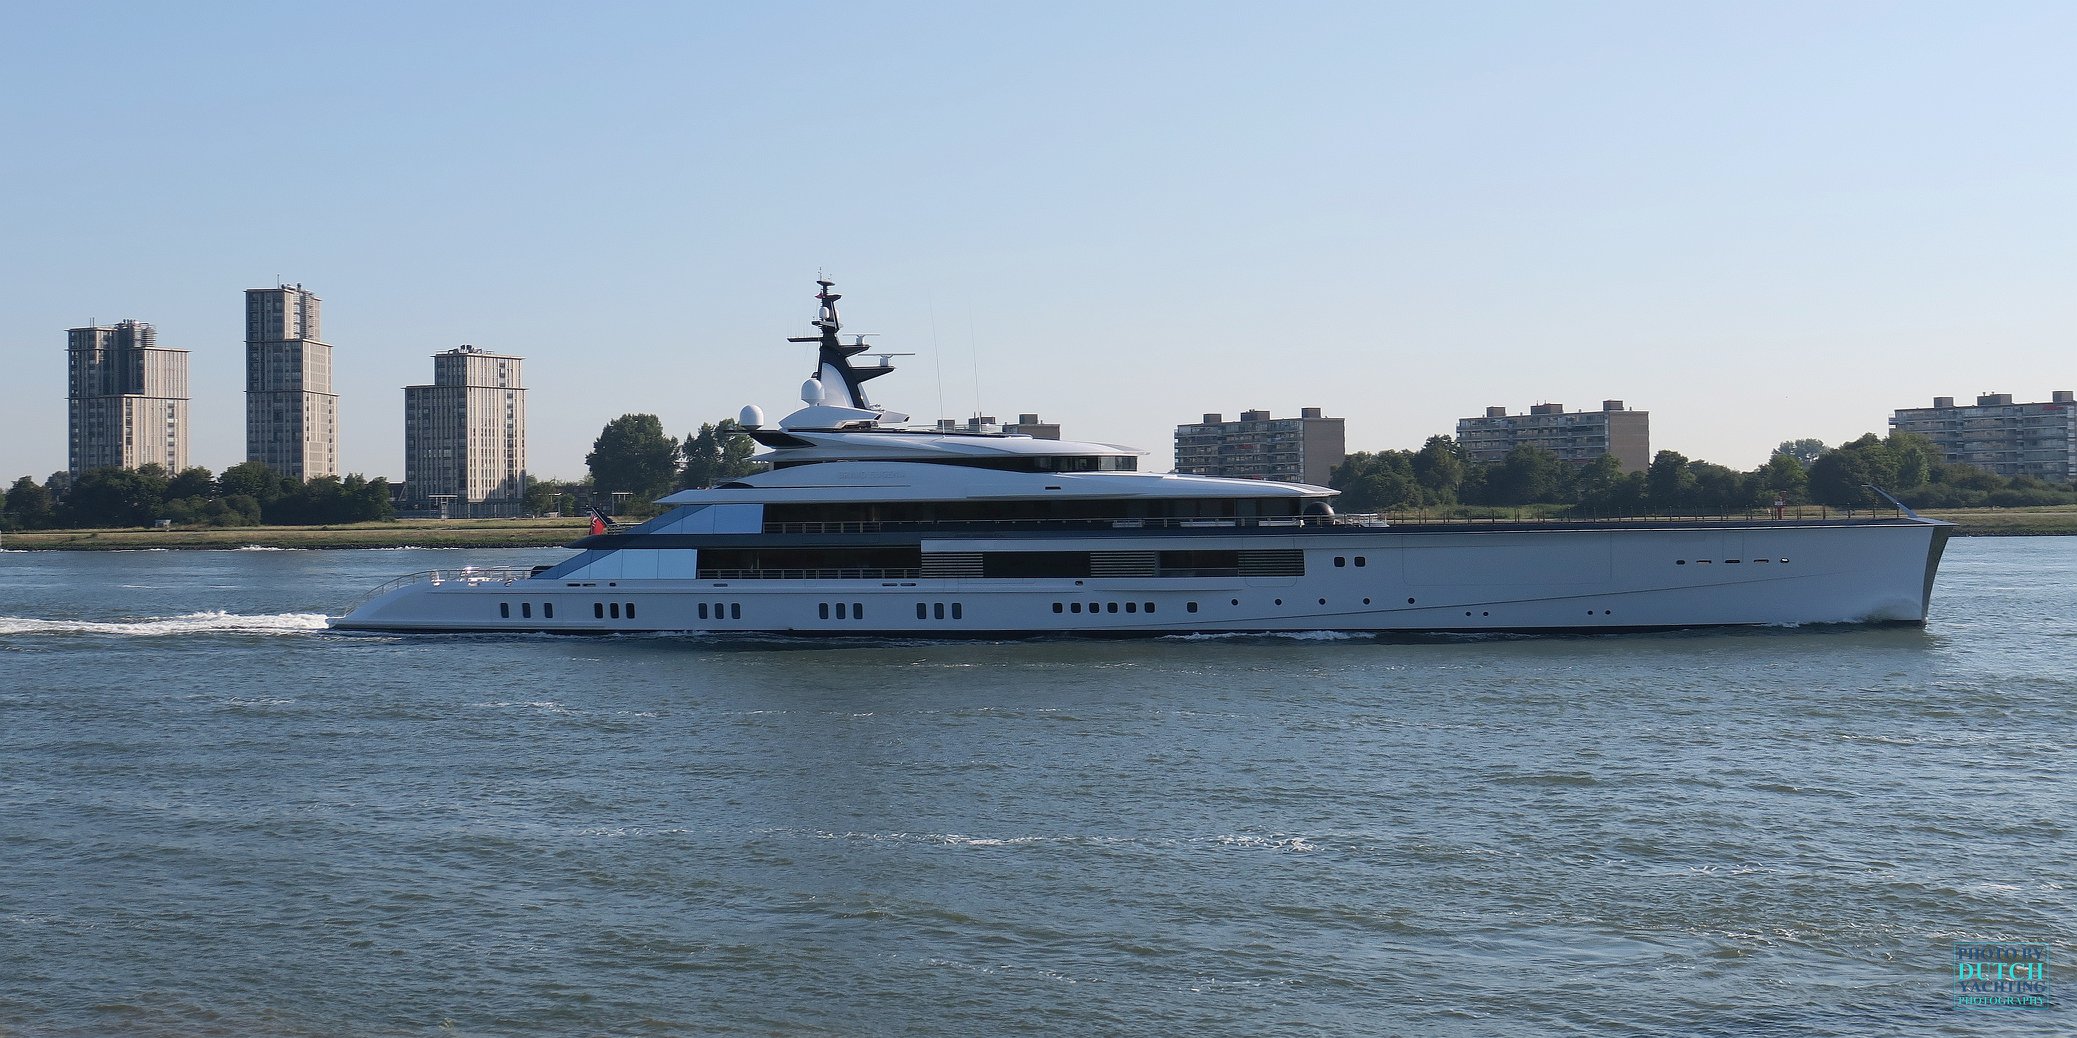 Nfl Team Owner S 109m Superyacht Bravo Eugenia Spotted In